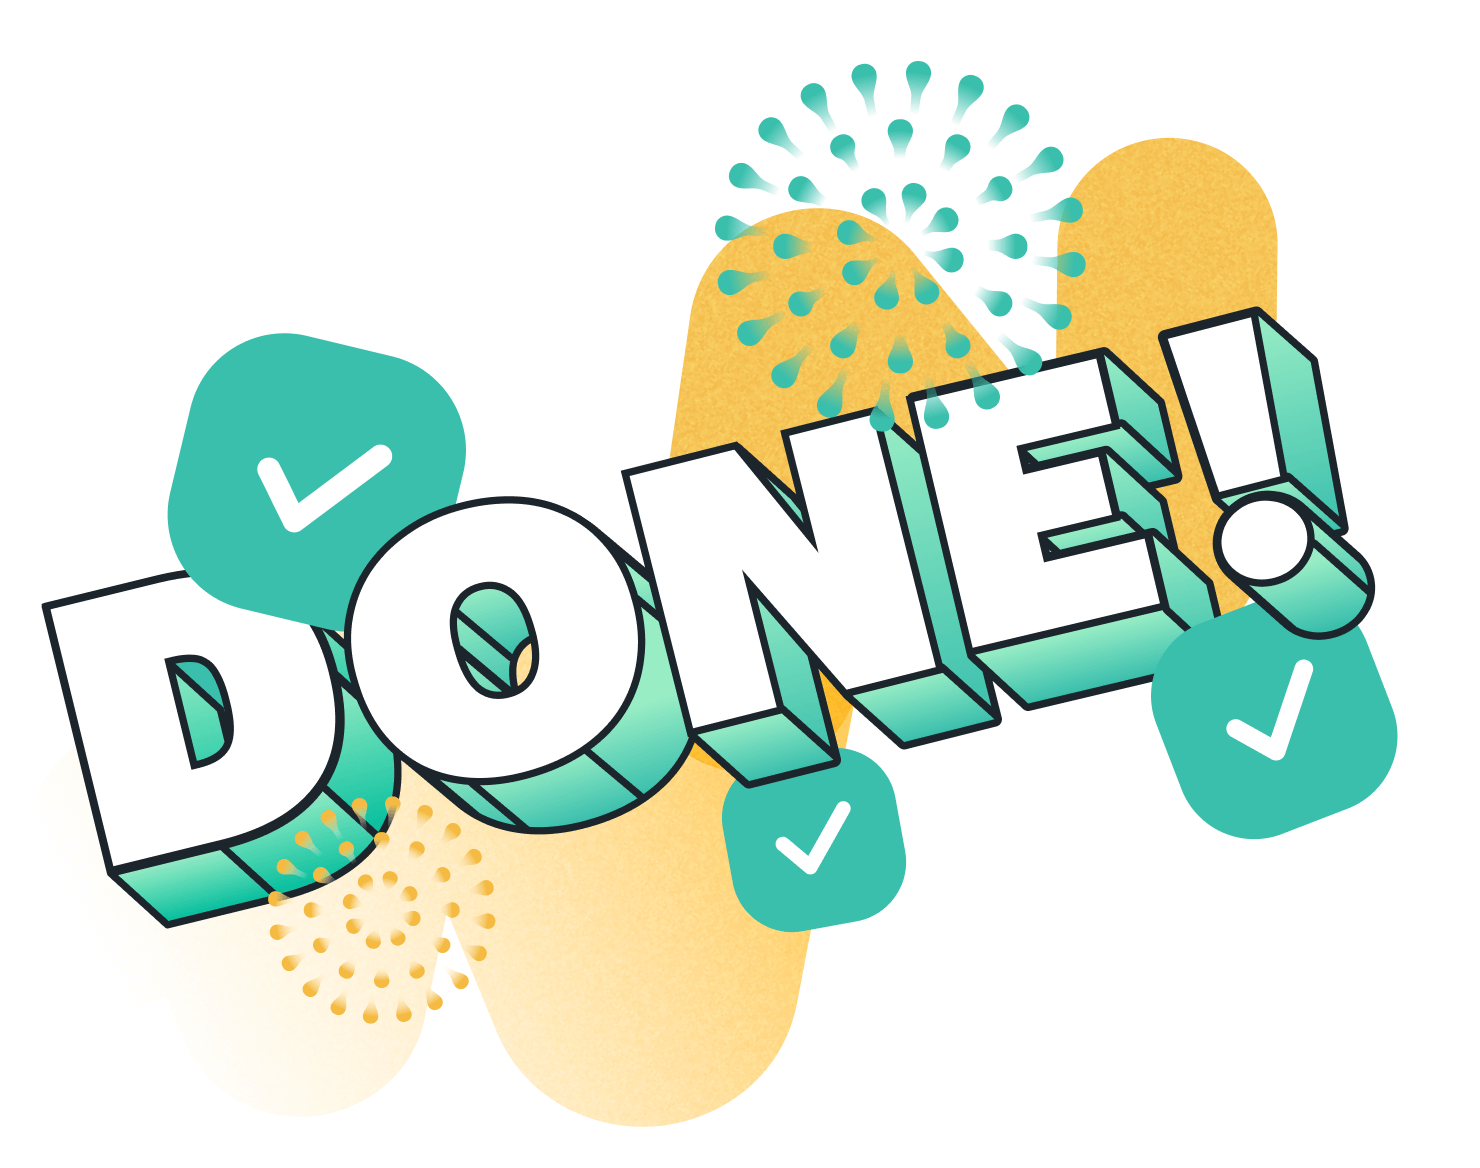 graphic saying "Done!"